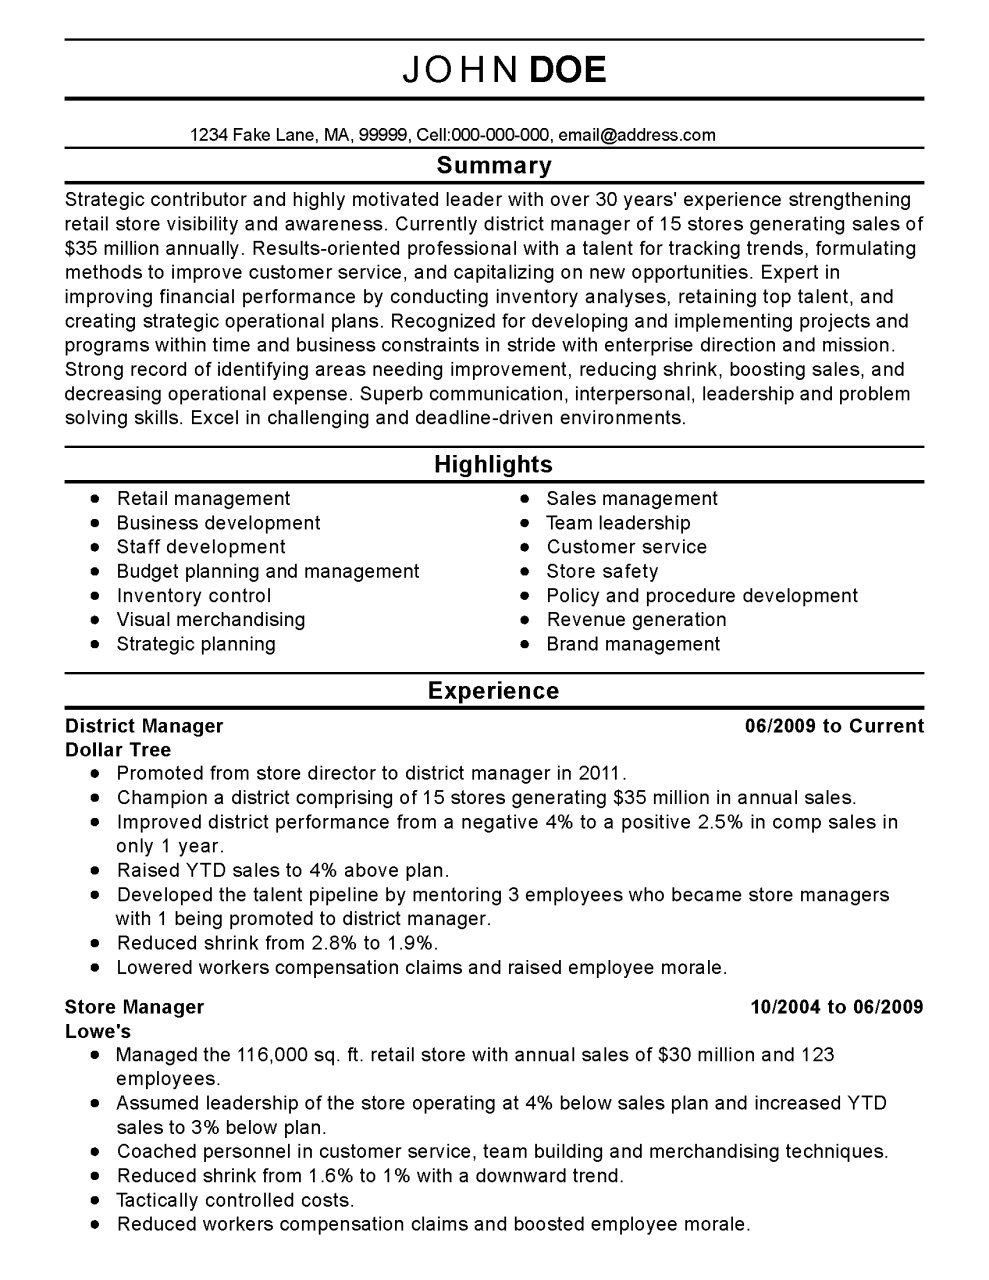 District Manager Resume